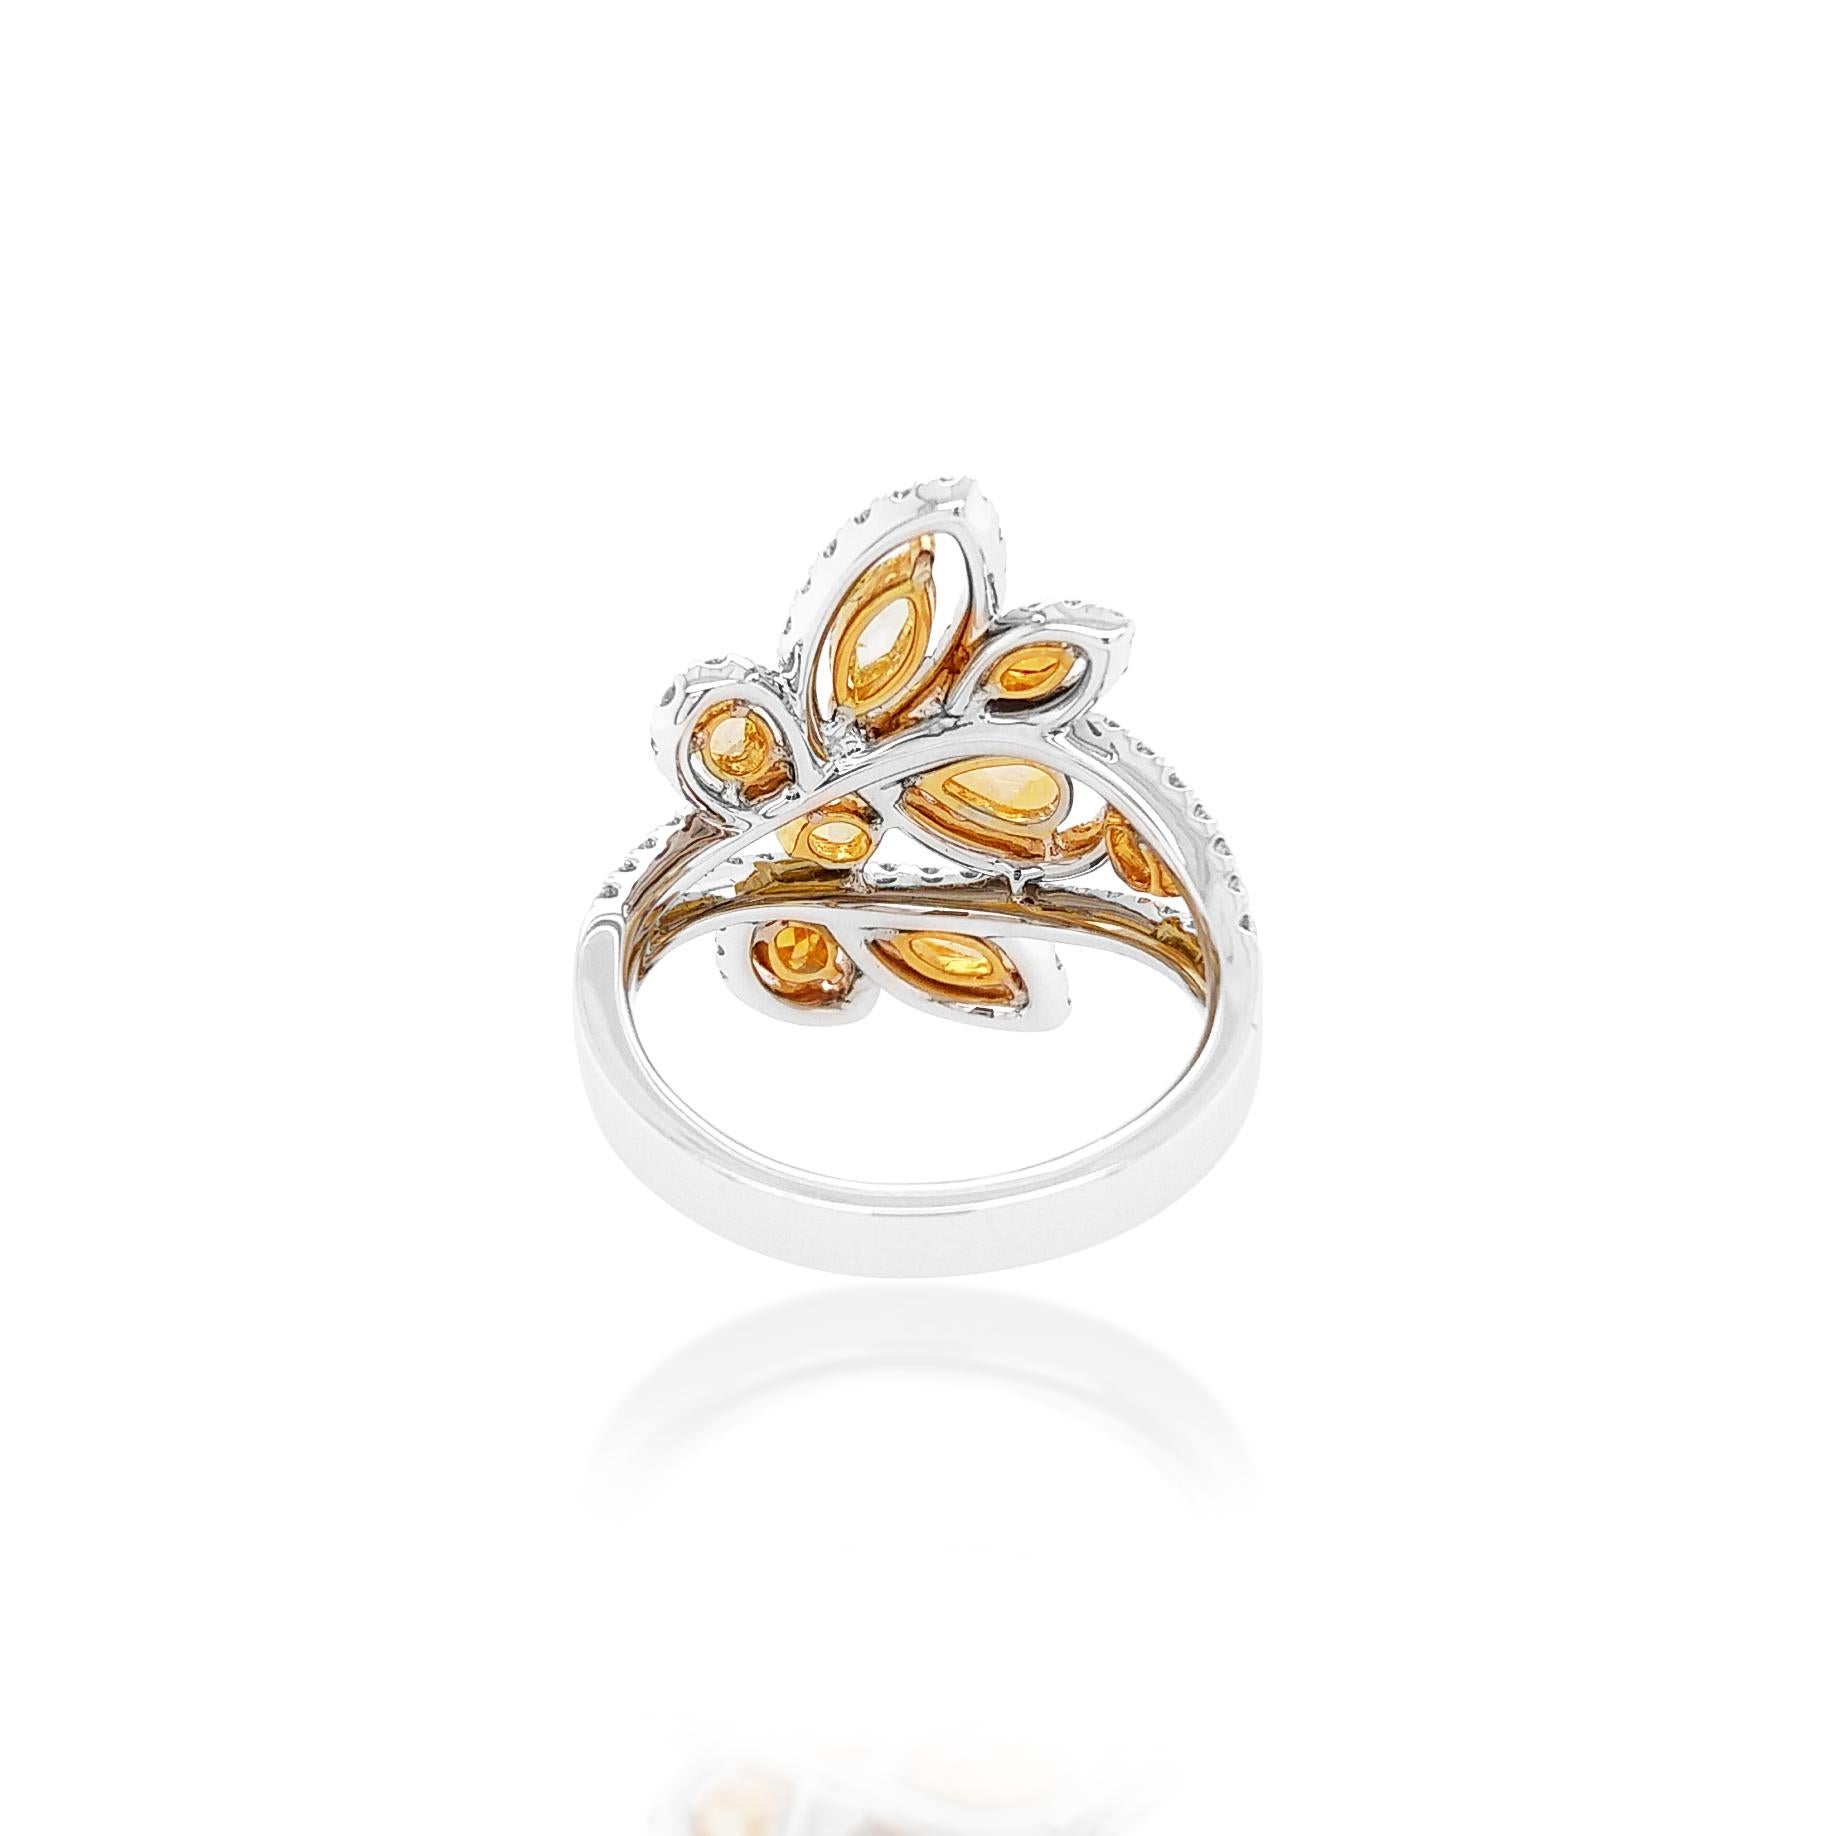 This contemporary Platinum cocktail ring features glamorous Fancy shapes Rose Cut Multicolor Diamonds, surrounding an elegant arrangement of white diamonds. Modern and stylish, this ring will make a statement whenever and however it is